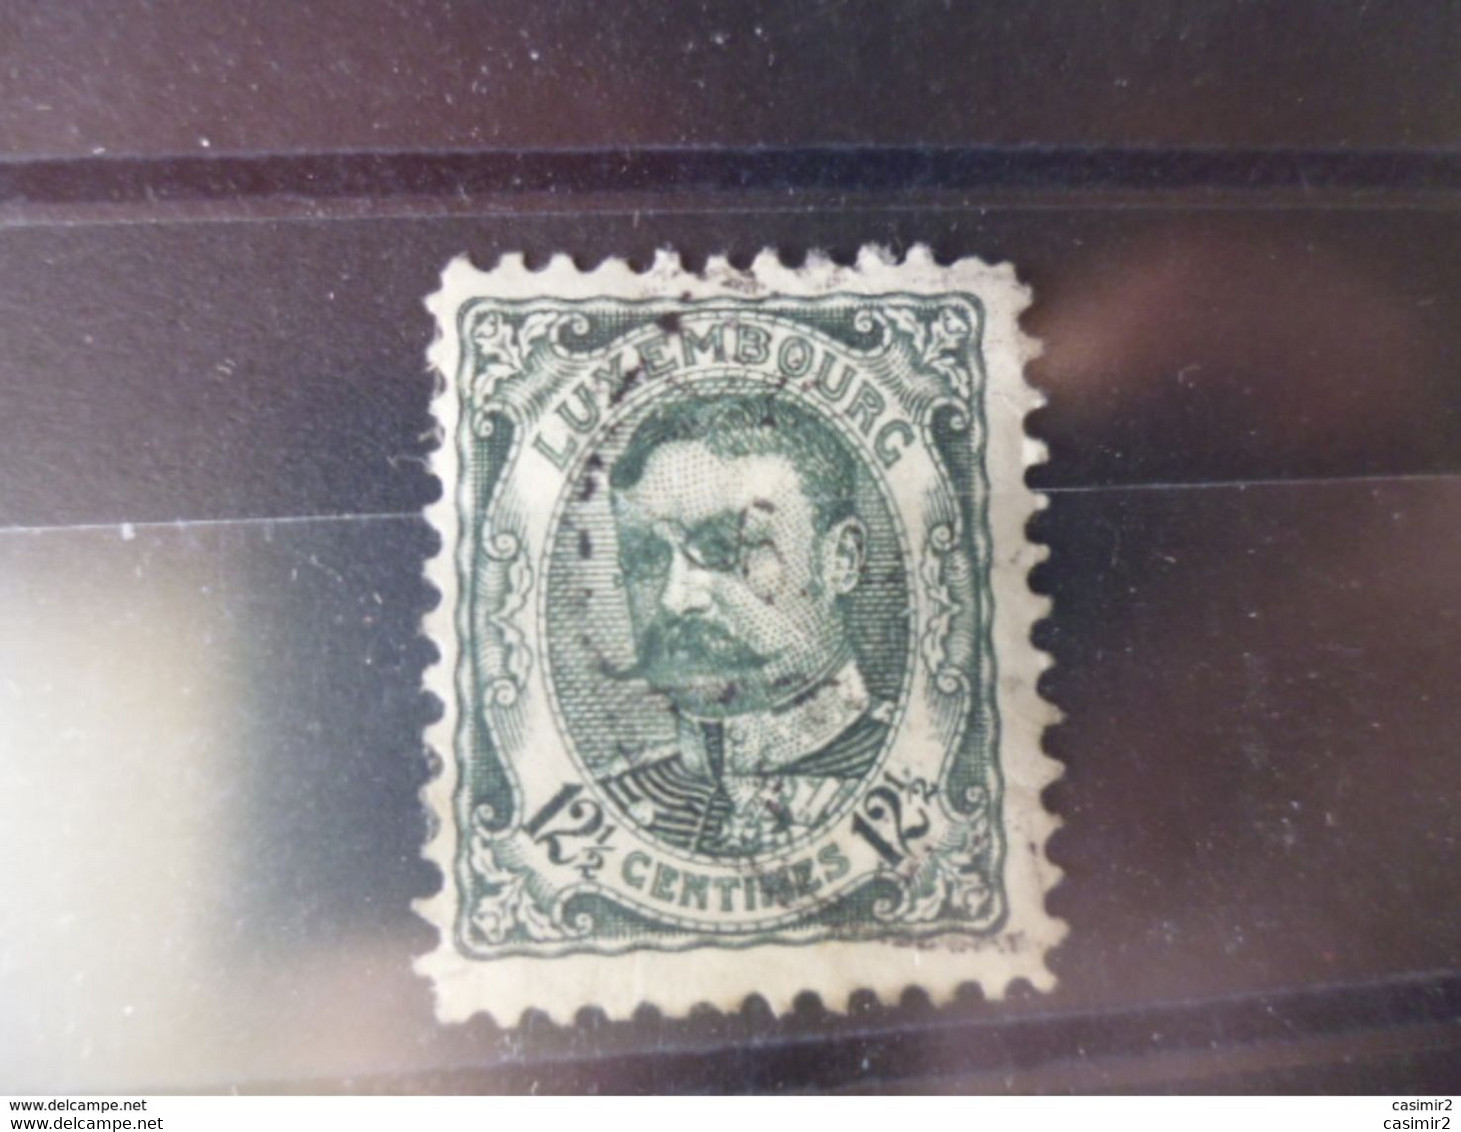 LUXEMBOURG TIMBRE YVERT N° 75 - 1906 Wilhelm IV.